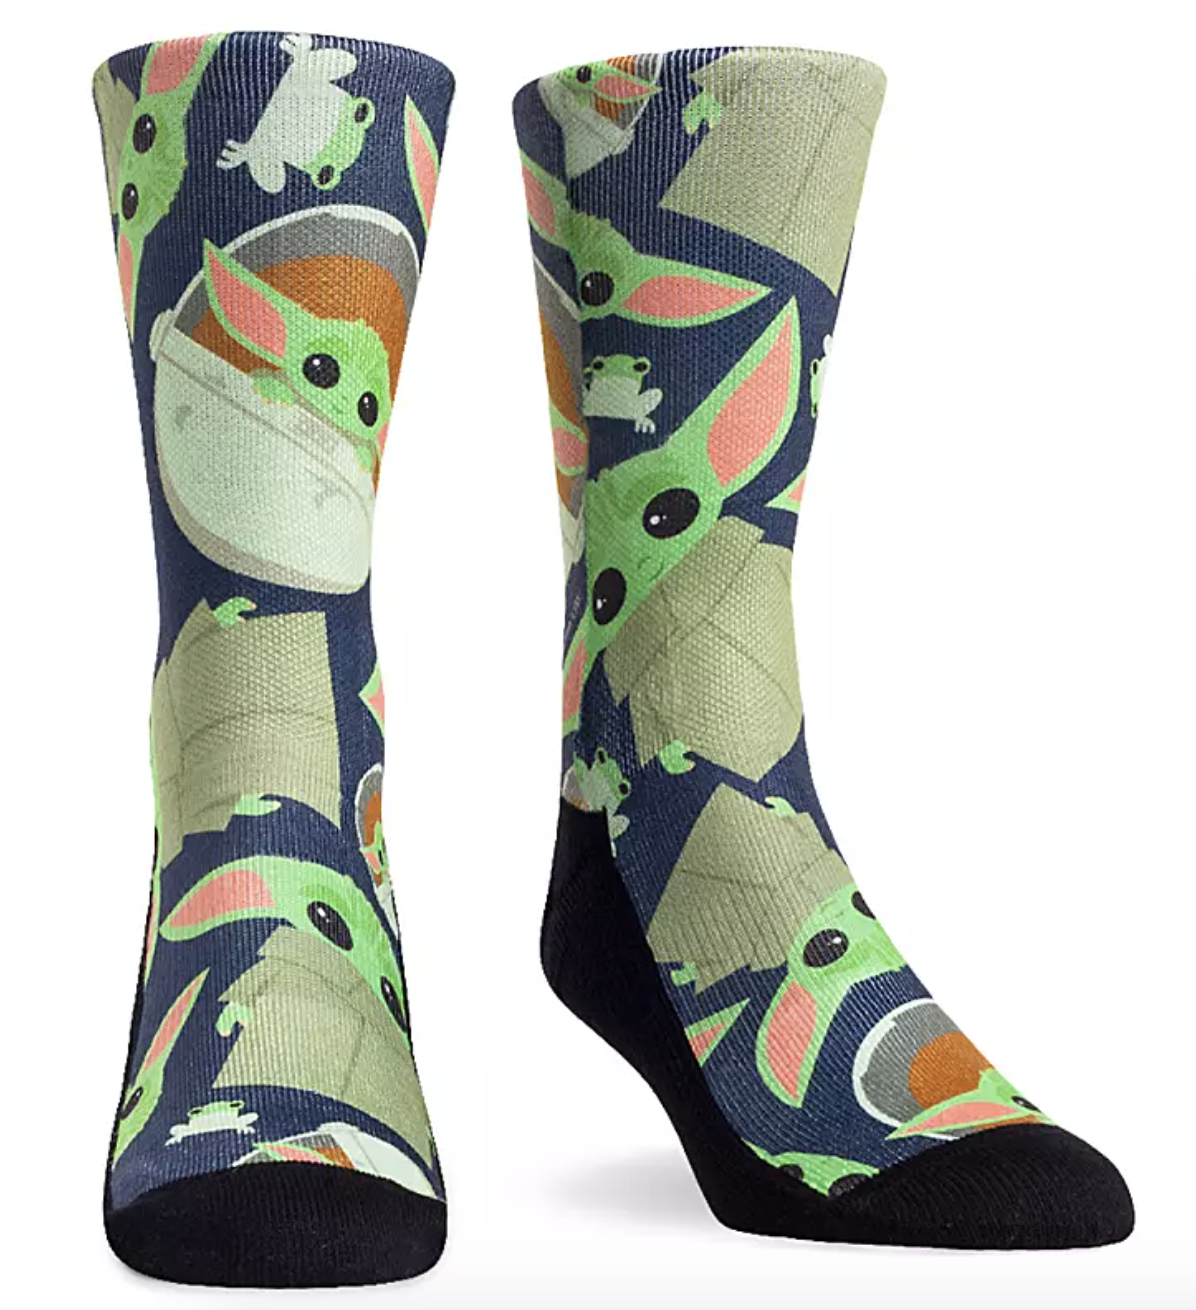 tall socks with an animated version of baby yoda on them